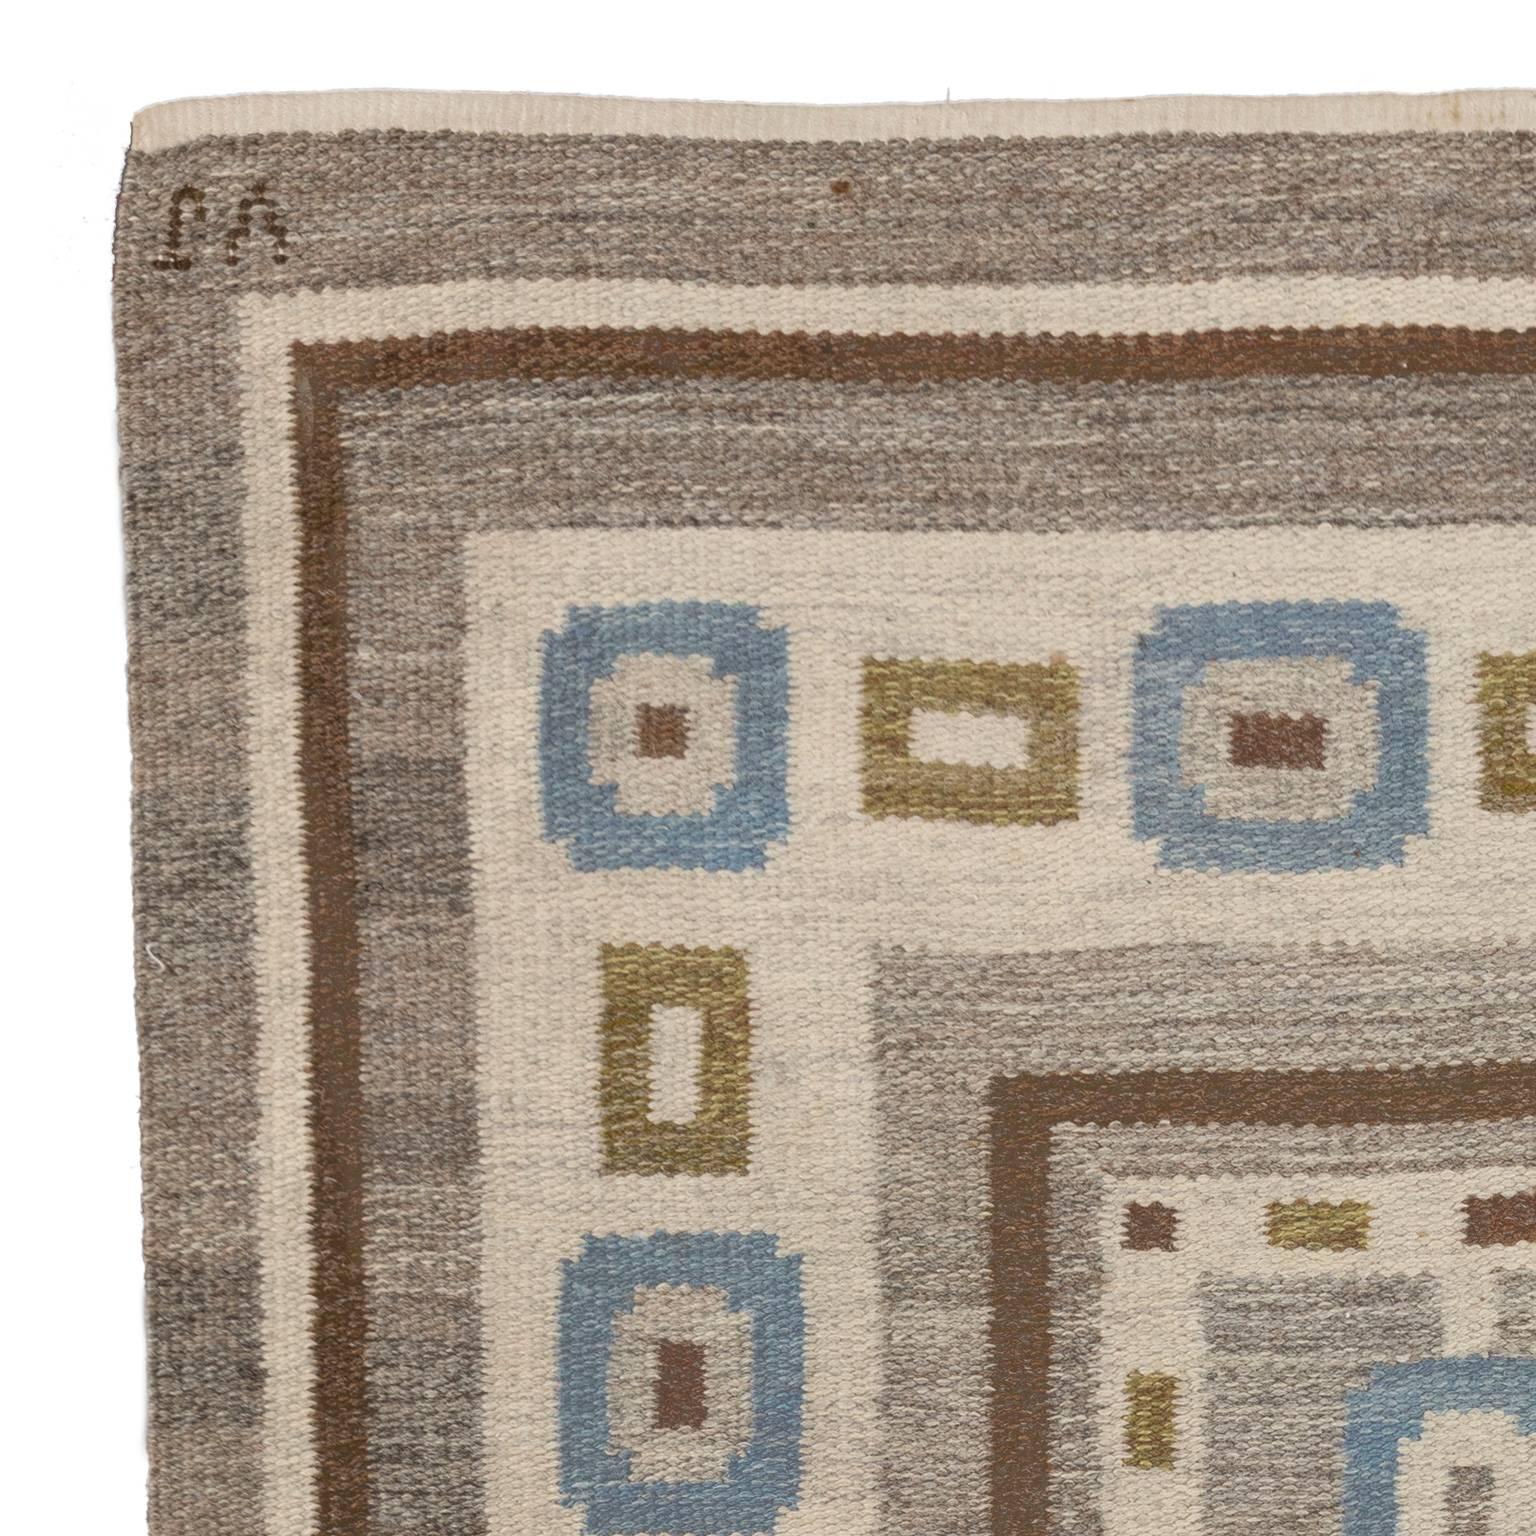 Mid-20th Century Handwoven Swedish Wool rug in Flat-Weave signed V.J.